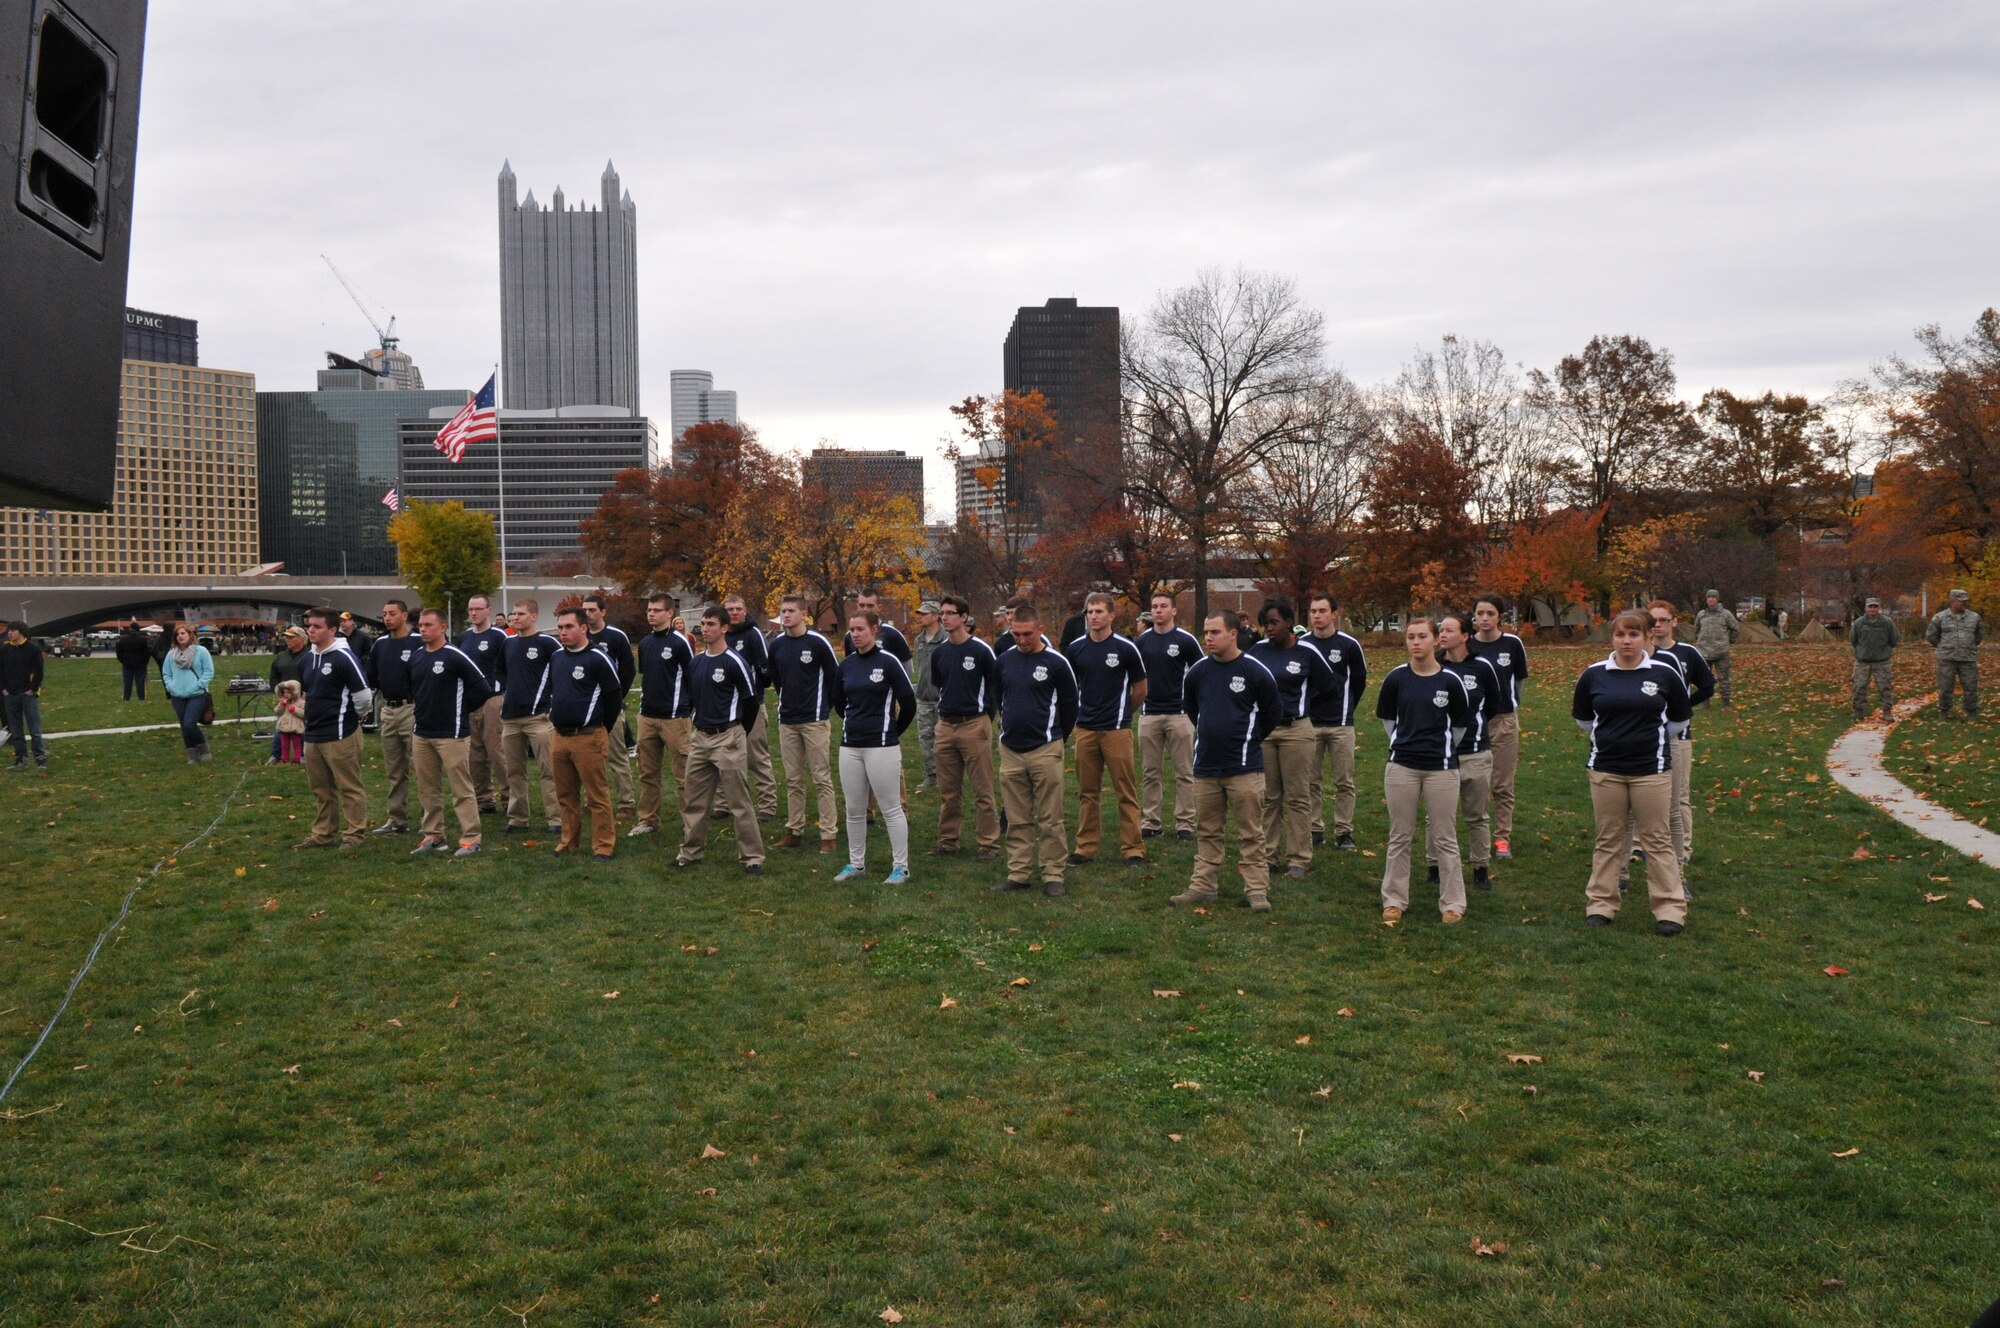 The Pennsylvania National Guard joined with the Pennsylvania Department of Conservation of Natural Resources' Point State Park and the Association of the United States Army to organize Steel City Salutes the Troops, Pittsburgh, November 8, 2014.  The event is a celebration of the region’s military history, community impact and continued relevance. (U.S. Air National Guard photo by Staff Sgt. Michael Fariss/ Released)